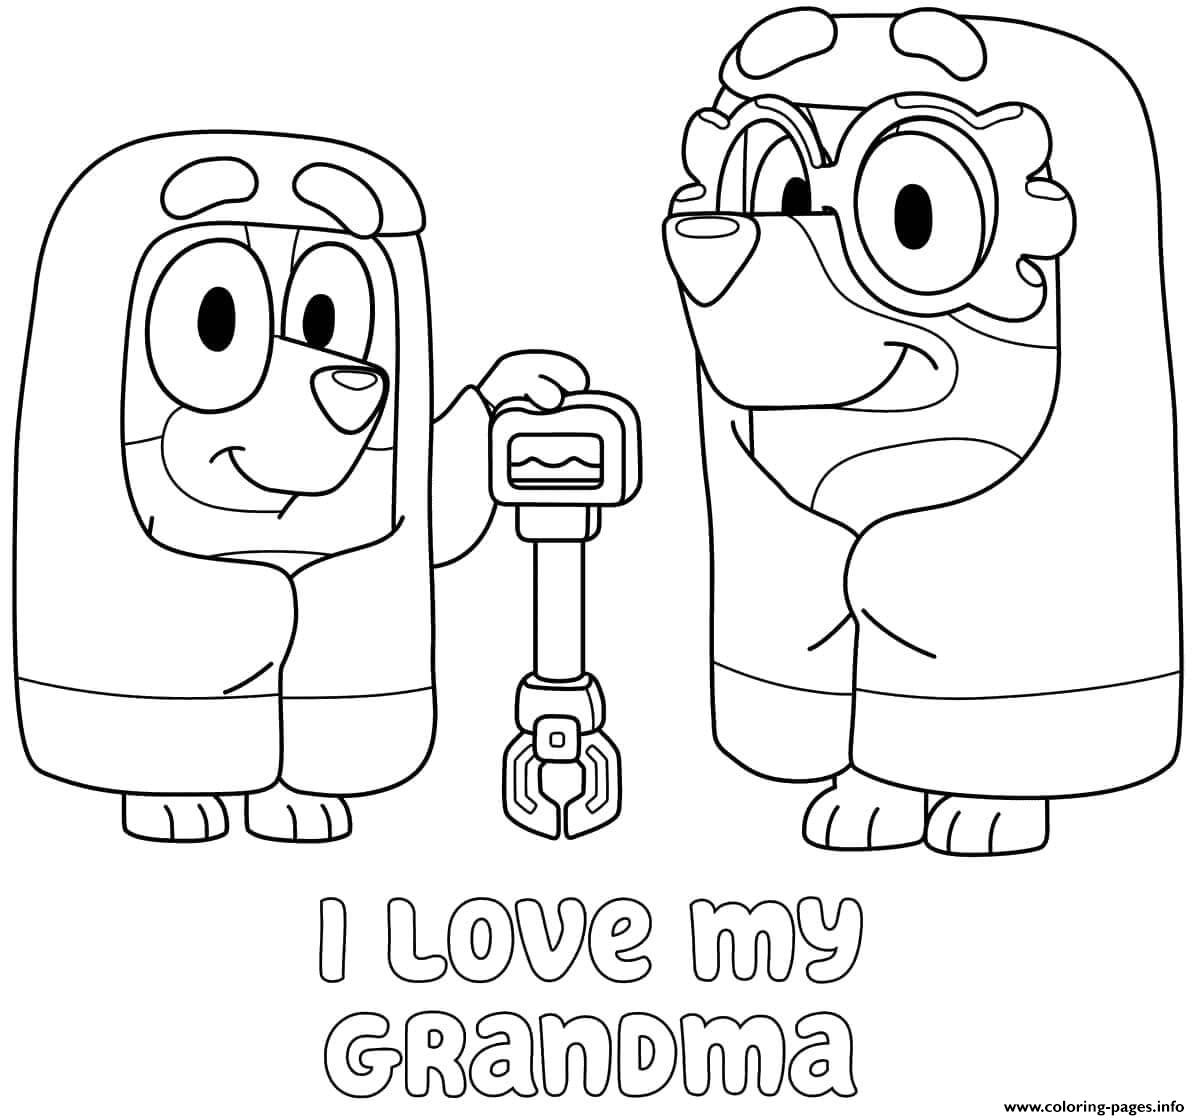 great-grandma-coloring-pages